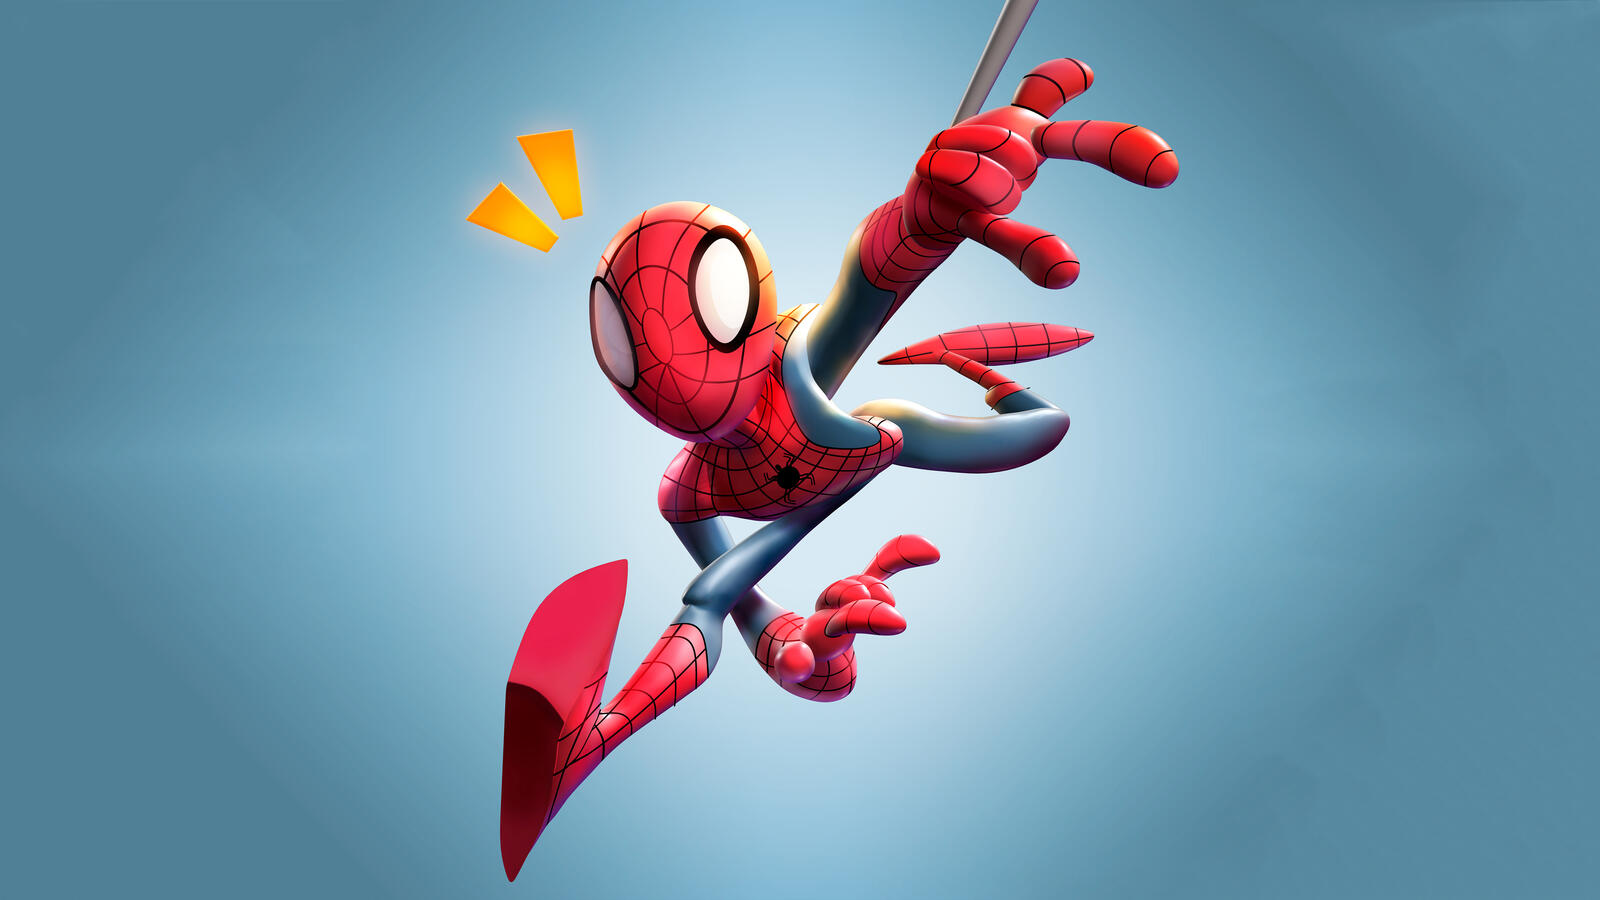 Wallpapers superheroes blue background 3d graphics on the desktop